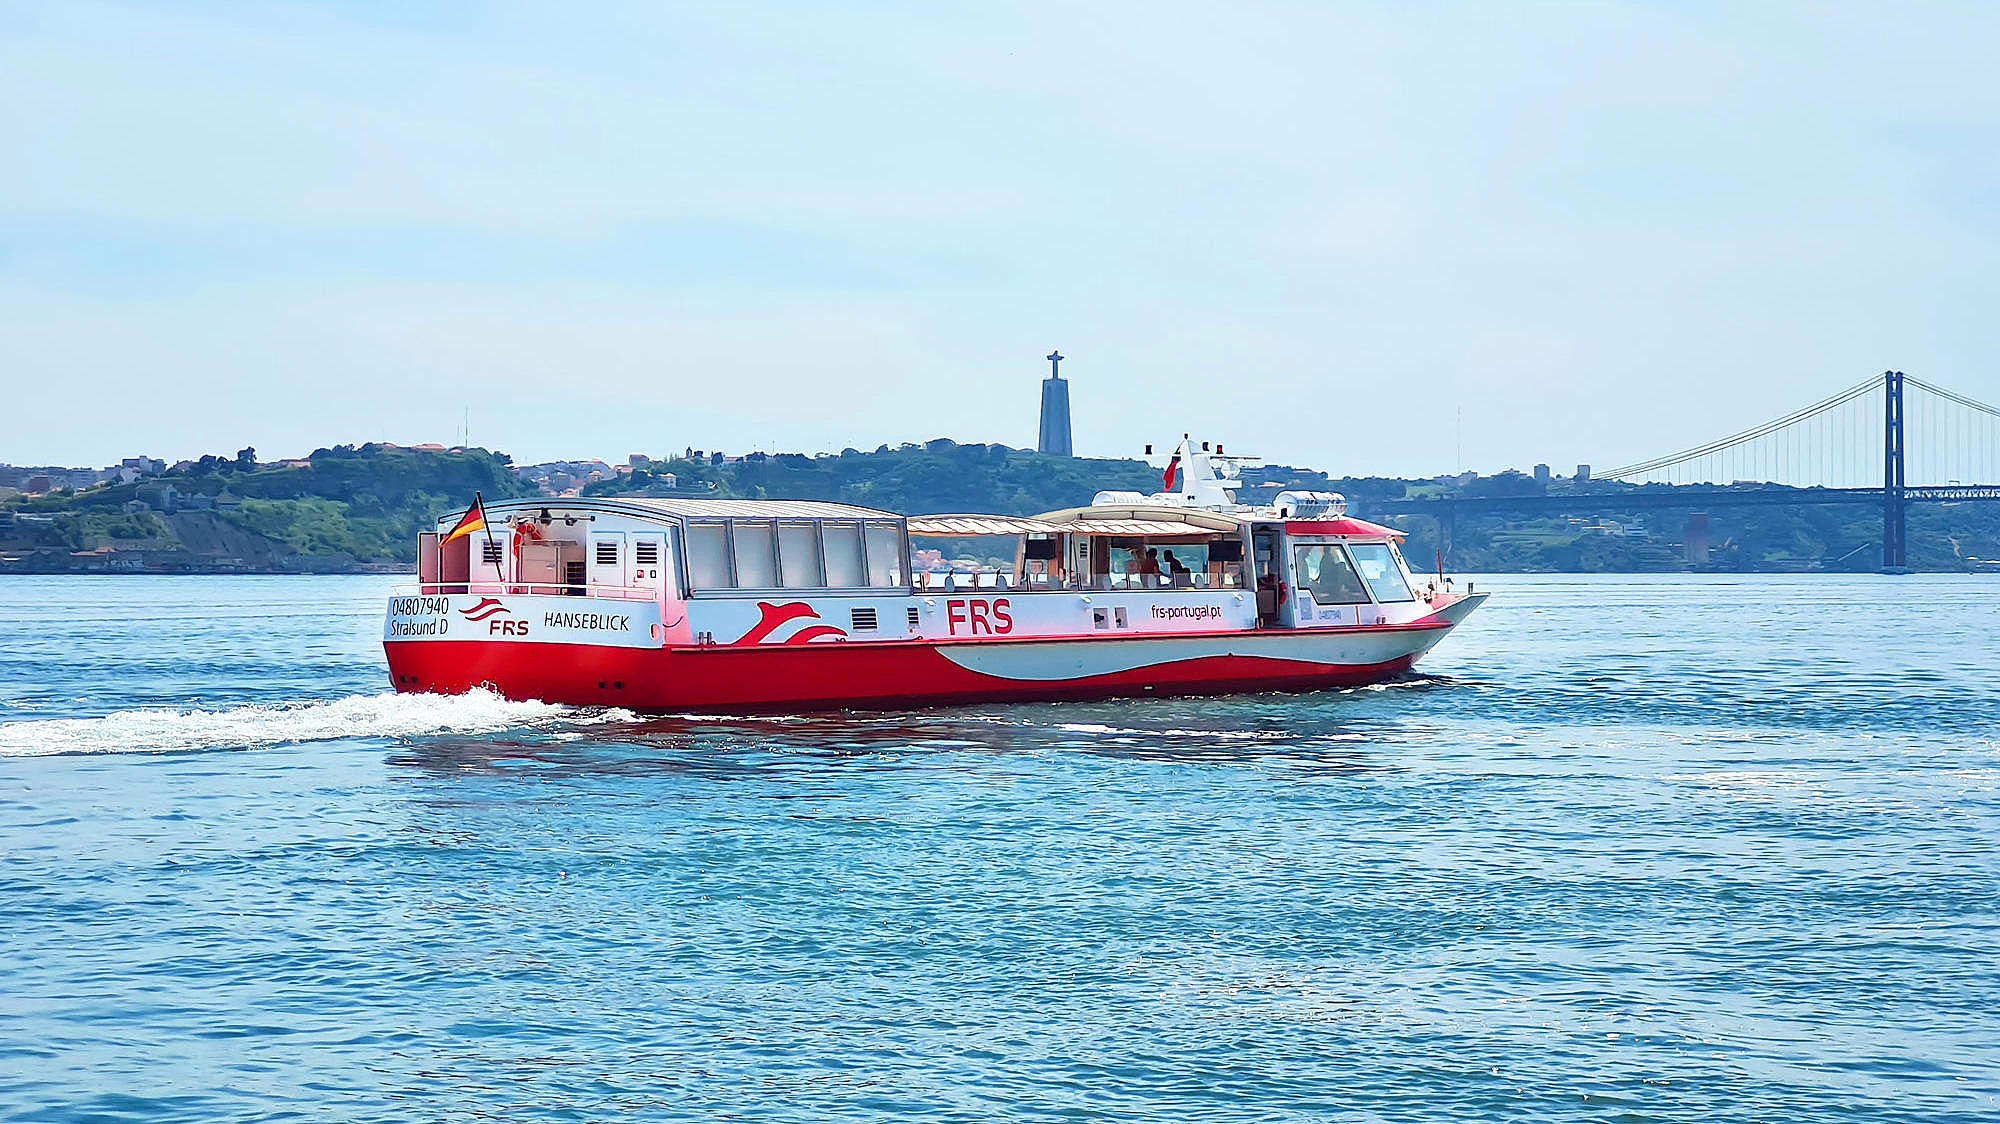 Vessel cruising on the Tagus river, Cristo Rei and the Ponte 25 de Abril in the background.